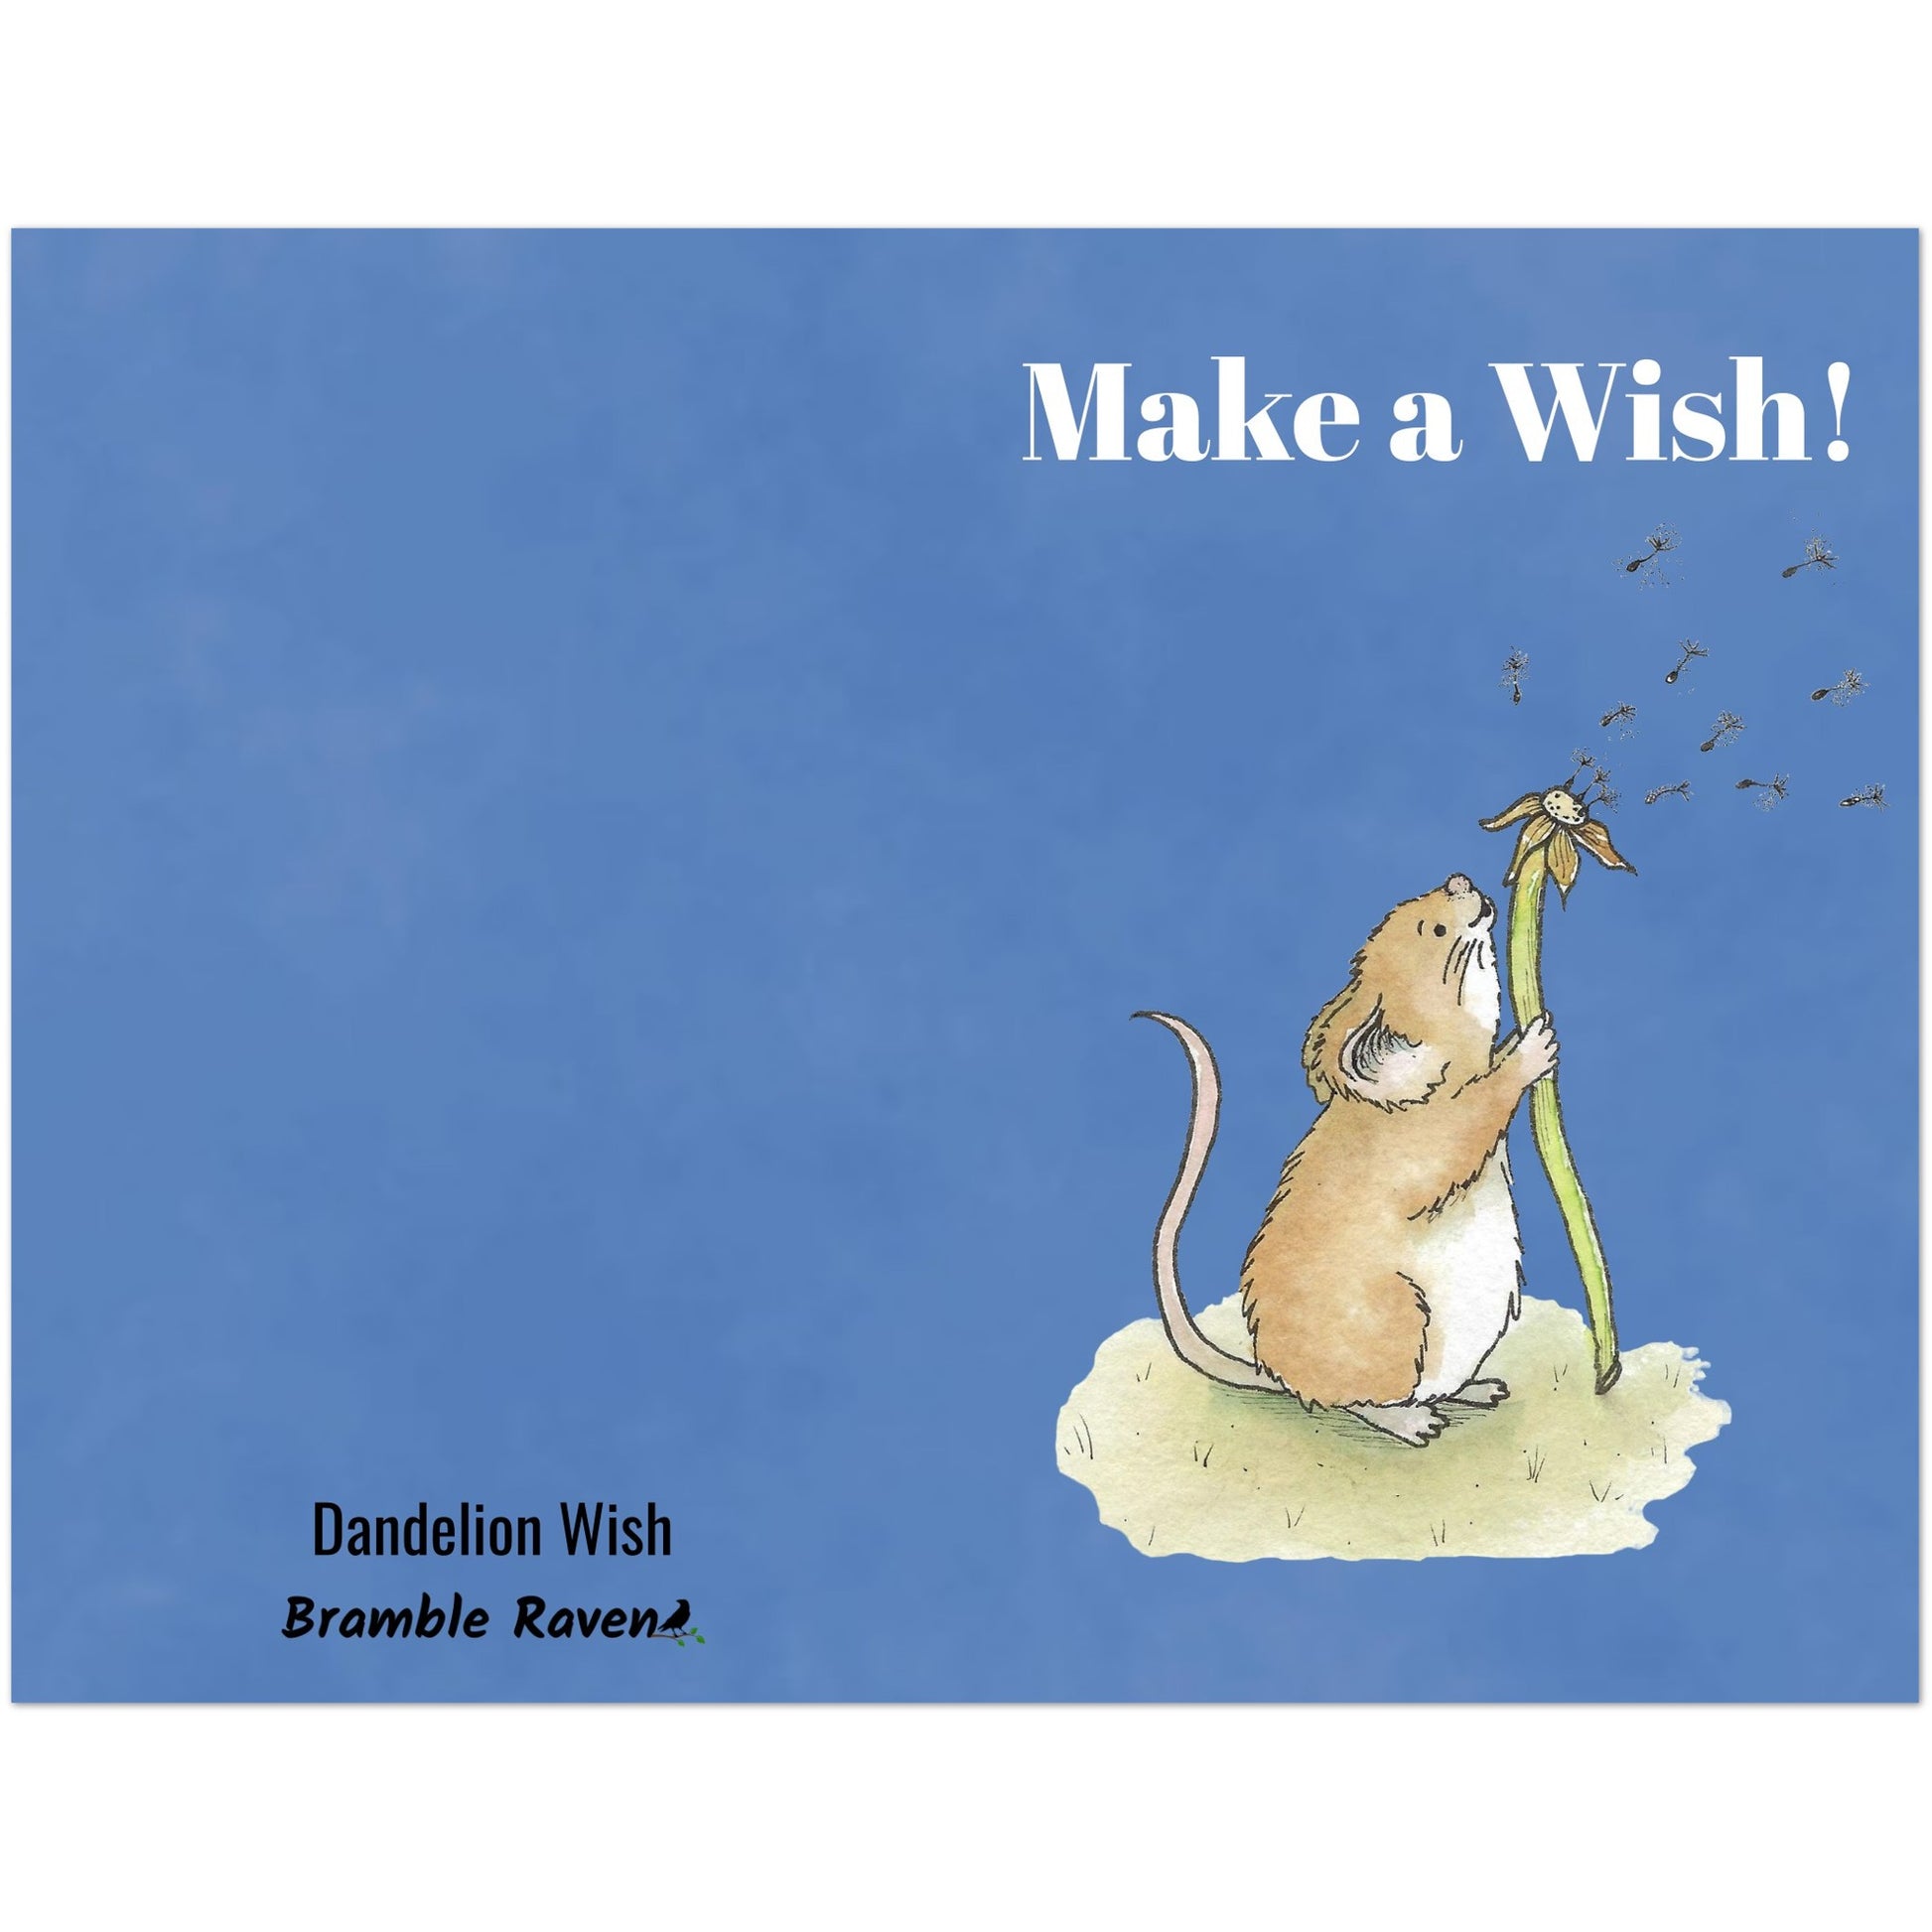 Ten fun greeting cards with envelopes. The front features white "Make a wish!" text and our watercolor dandelion wish mouse on a blue background. Inside is blank. Made with thick 350 gsm 150lb coated paperboard with vibrant printing.  Cards measure 5.5 by 8.5 inches.